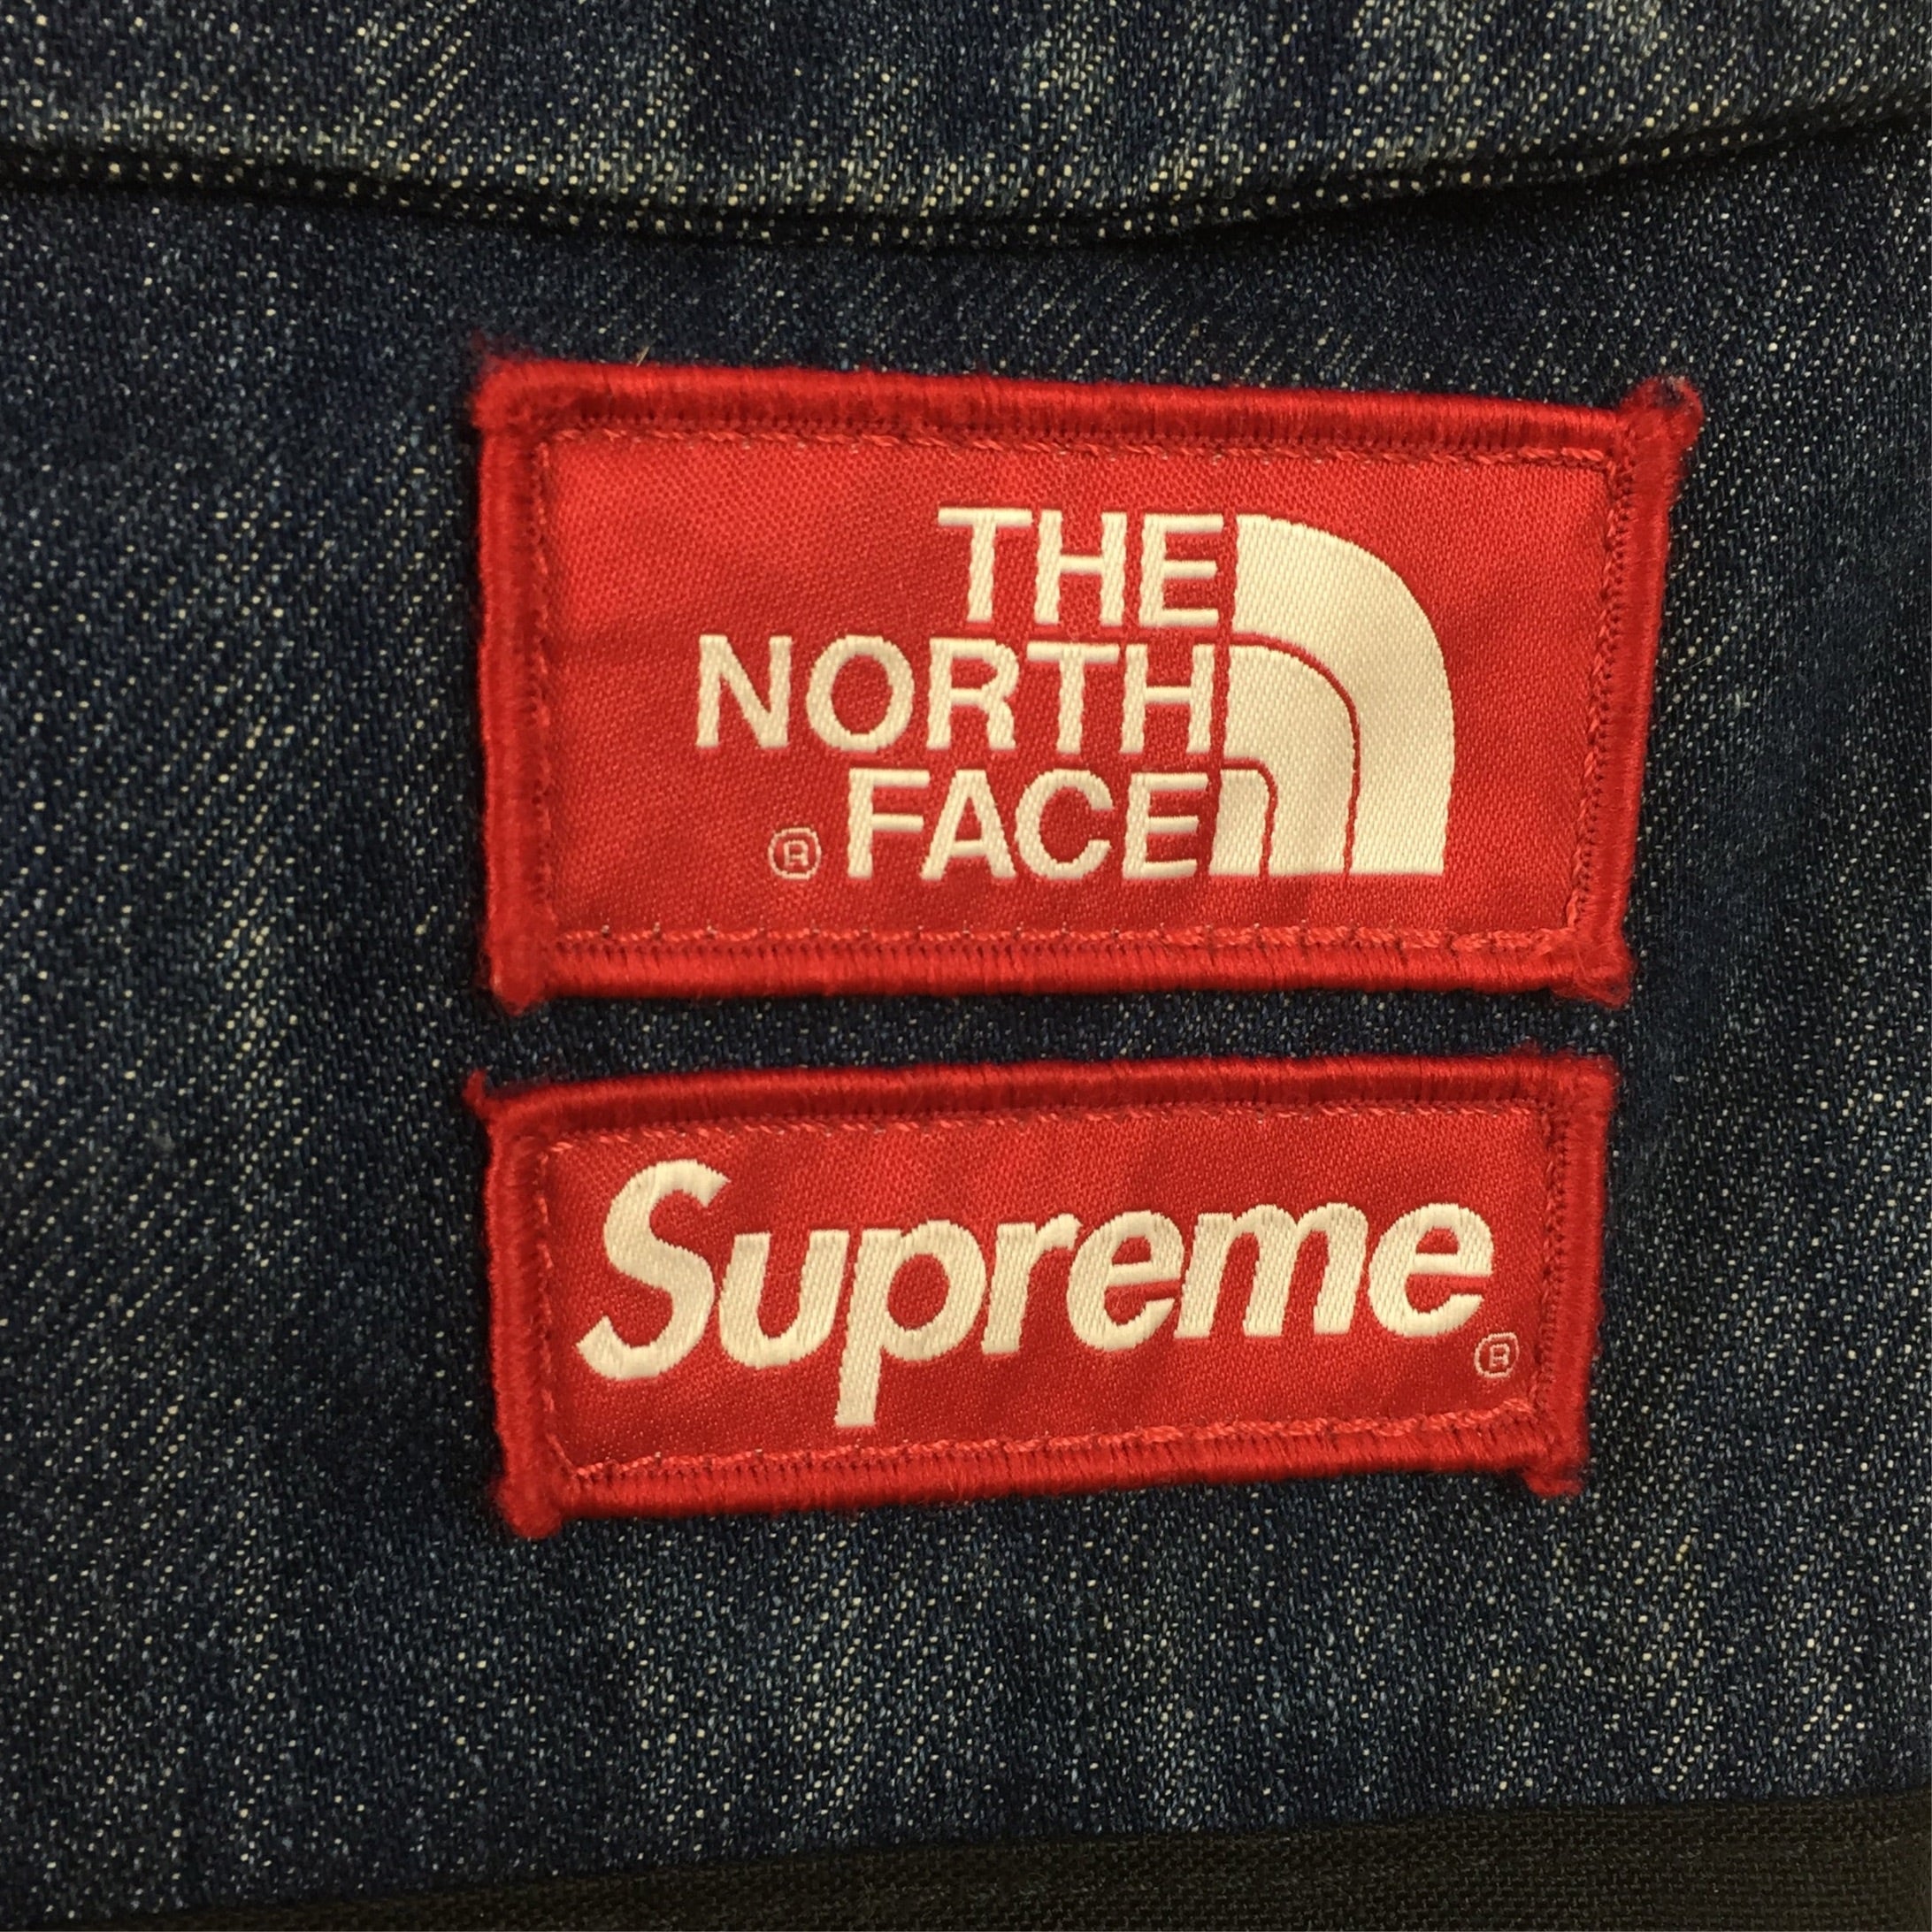 2015 Supreme x The North Face Denim Backpack